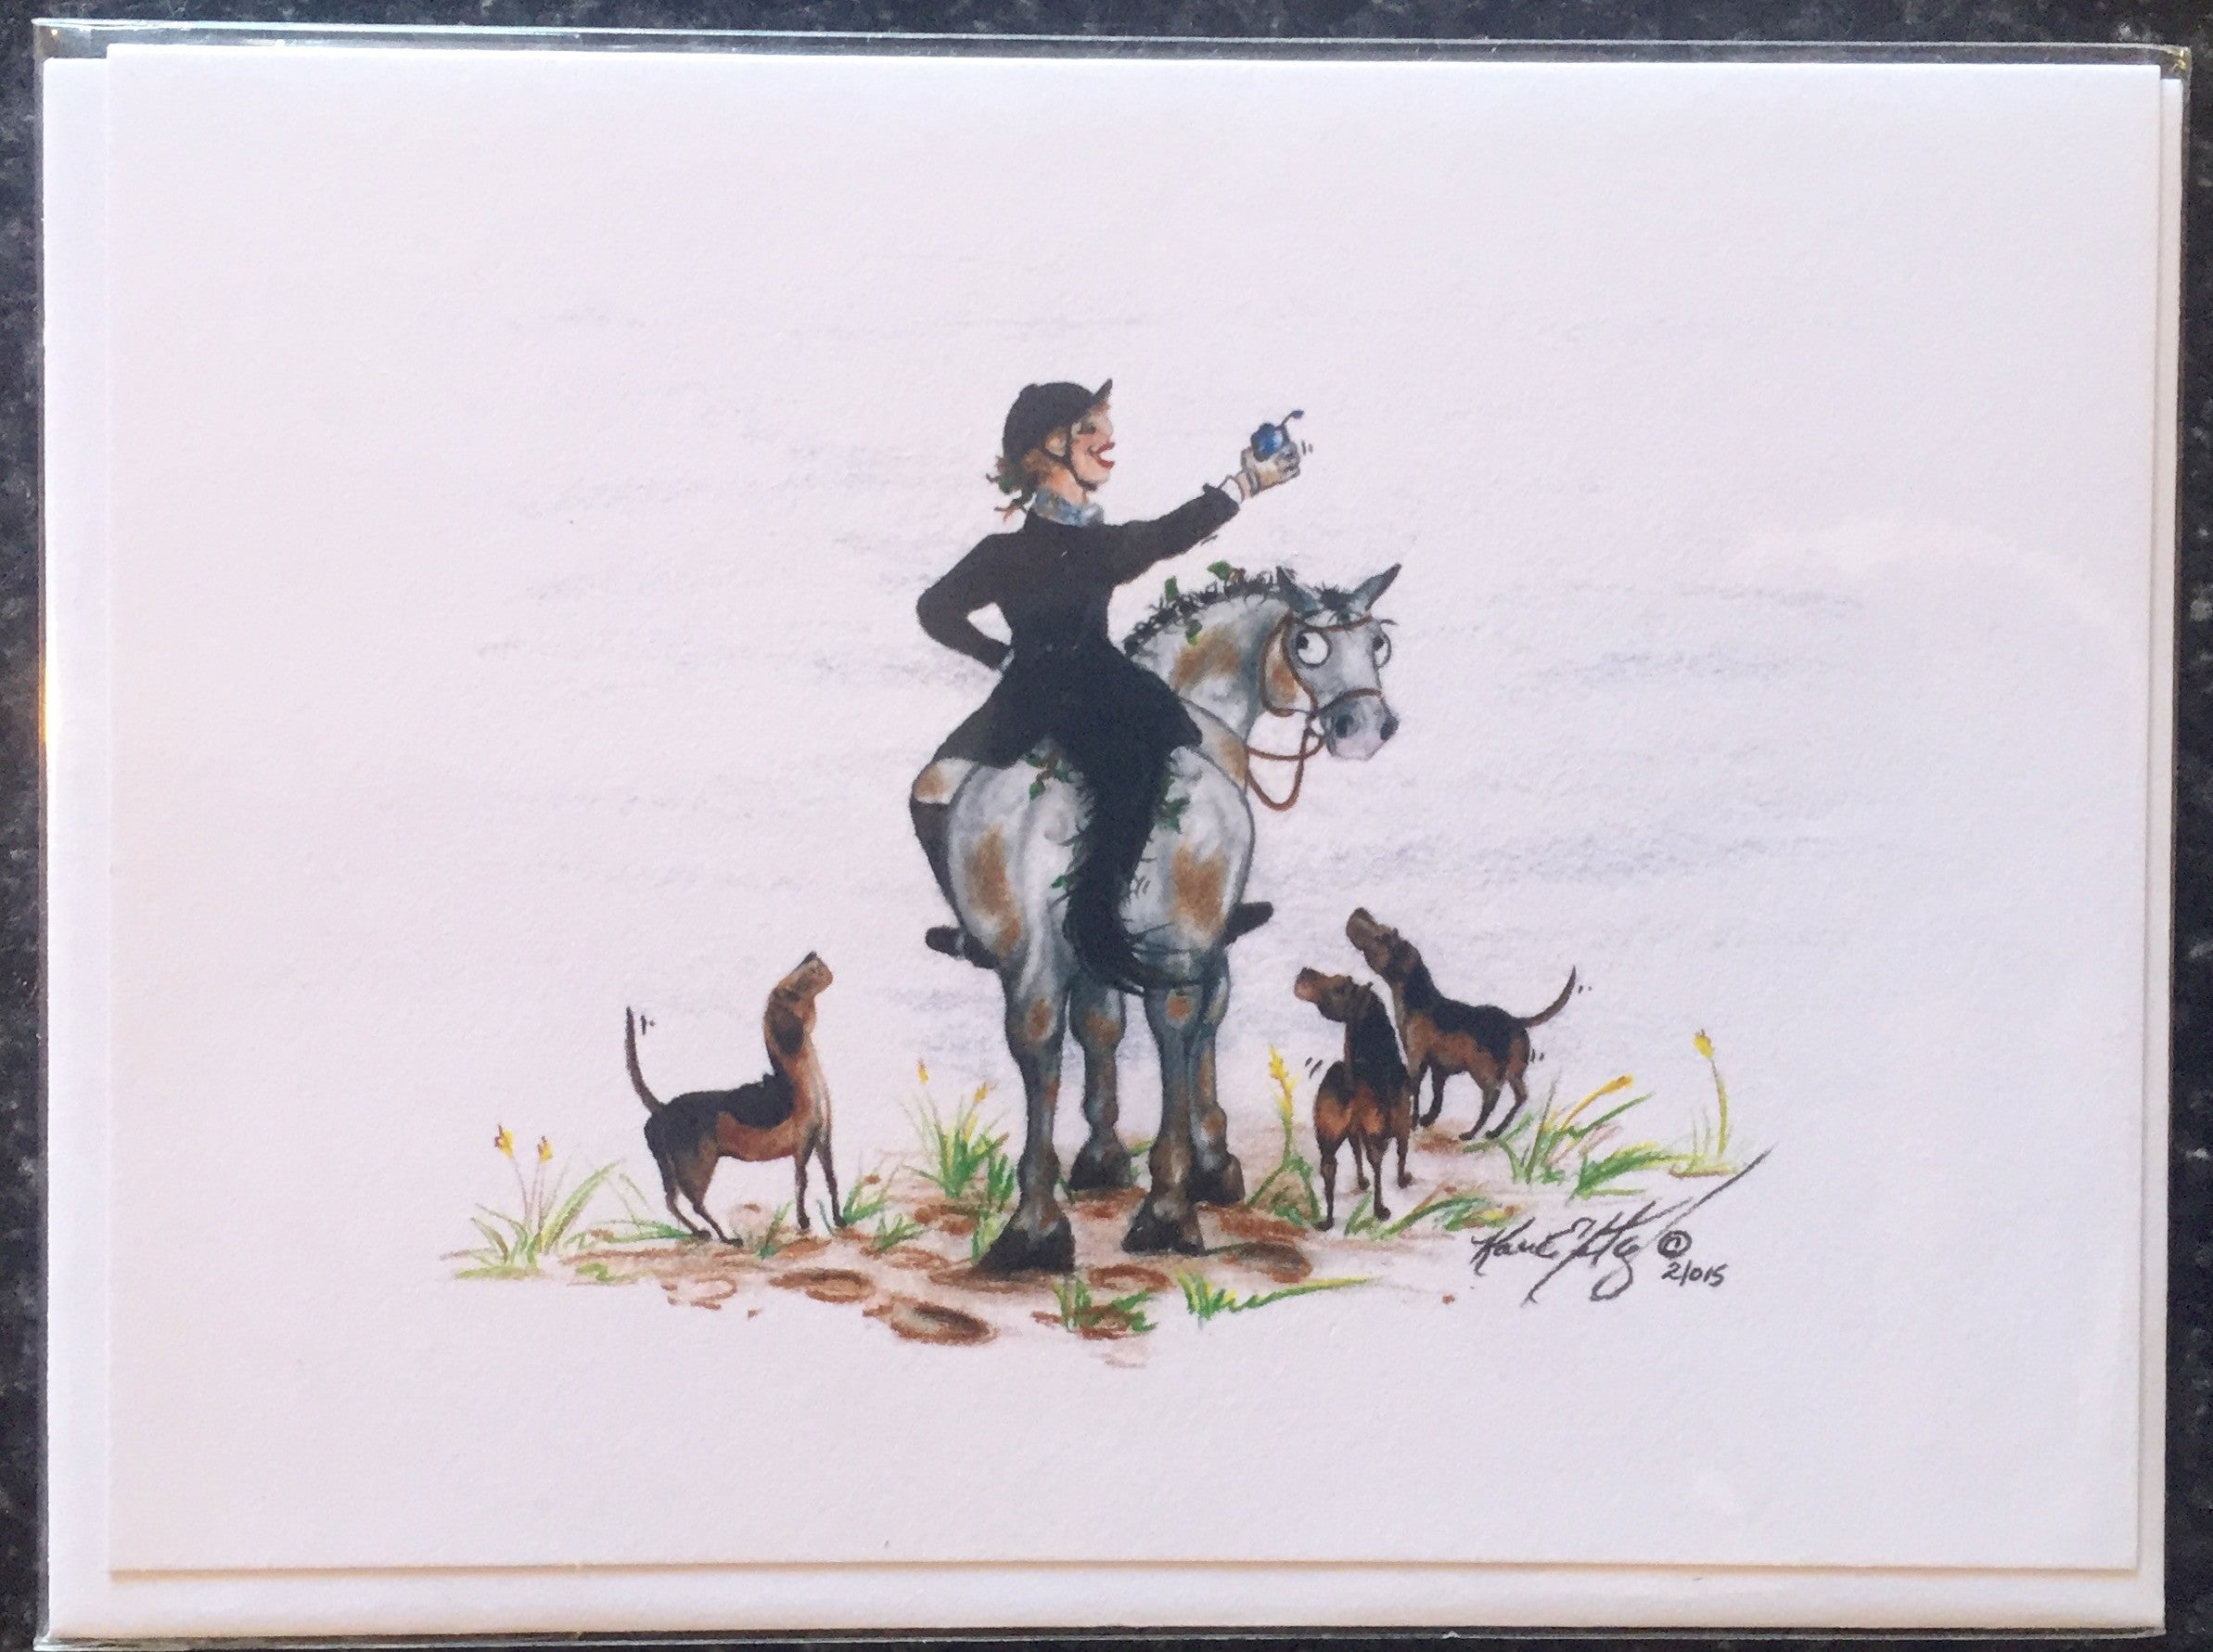 One Painted Pony Illustrations Gift Card "Carpe Diem" - Horse & Hound Tack Shop & Pet Supply